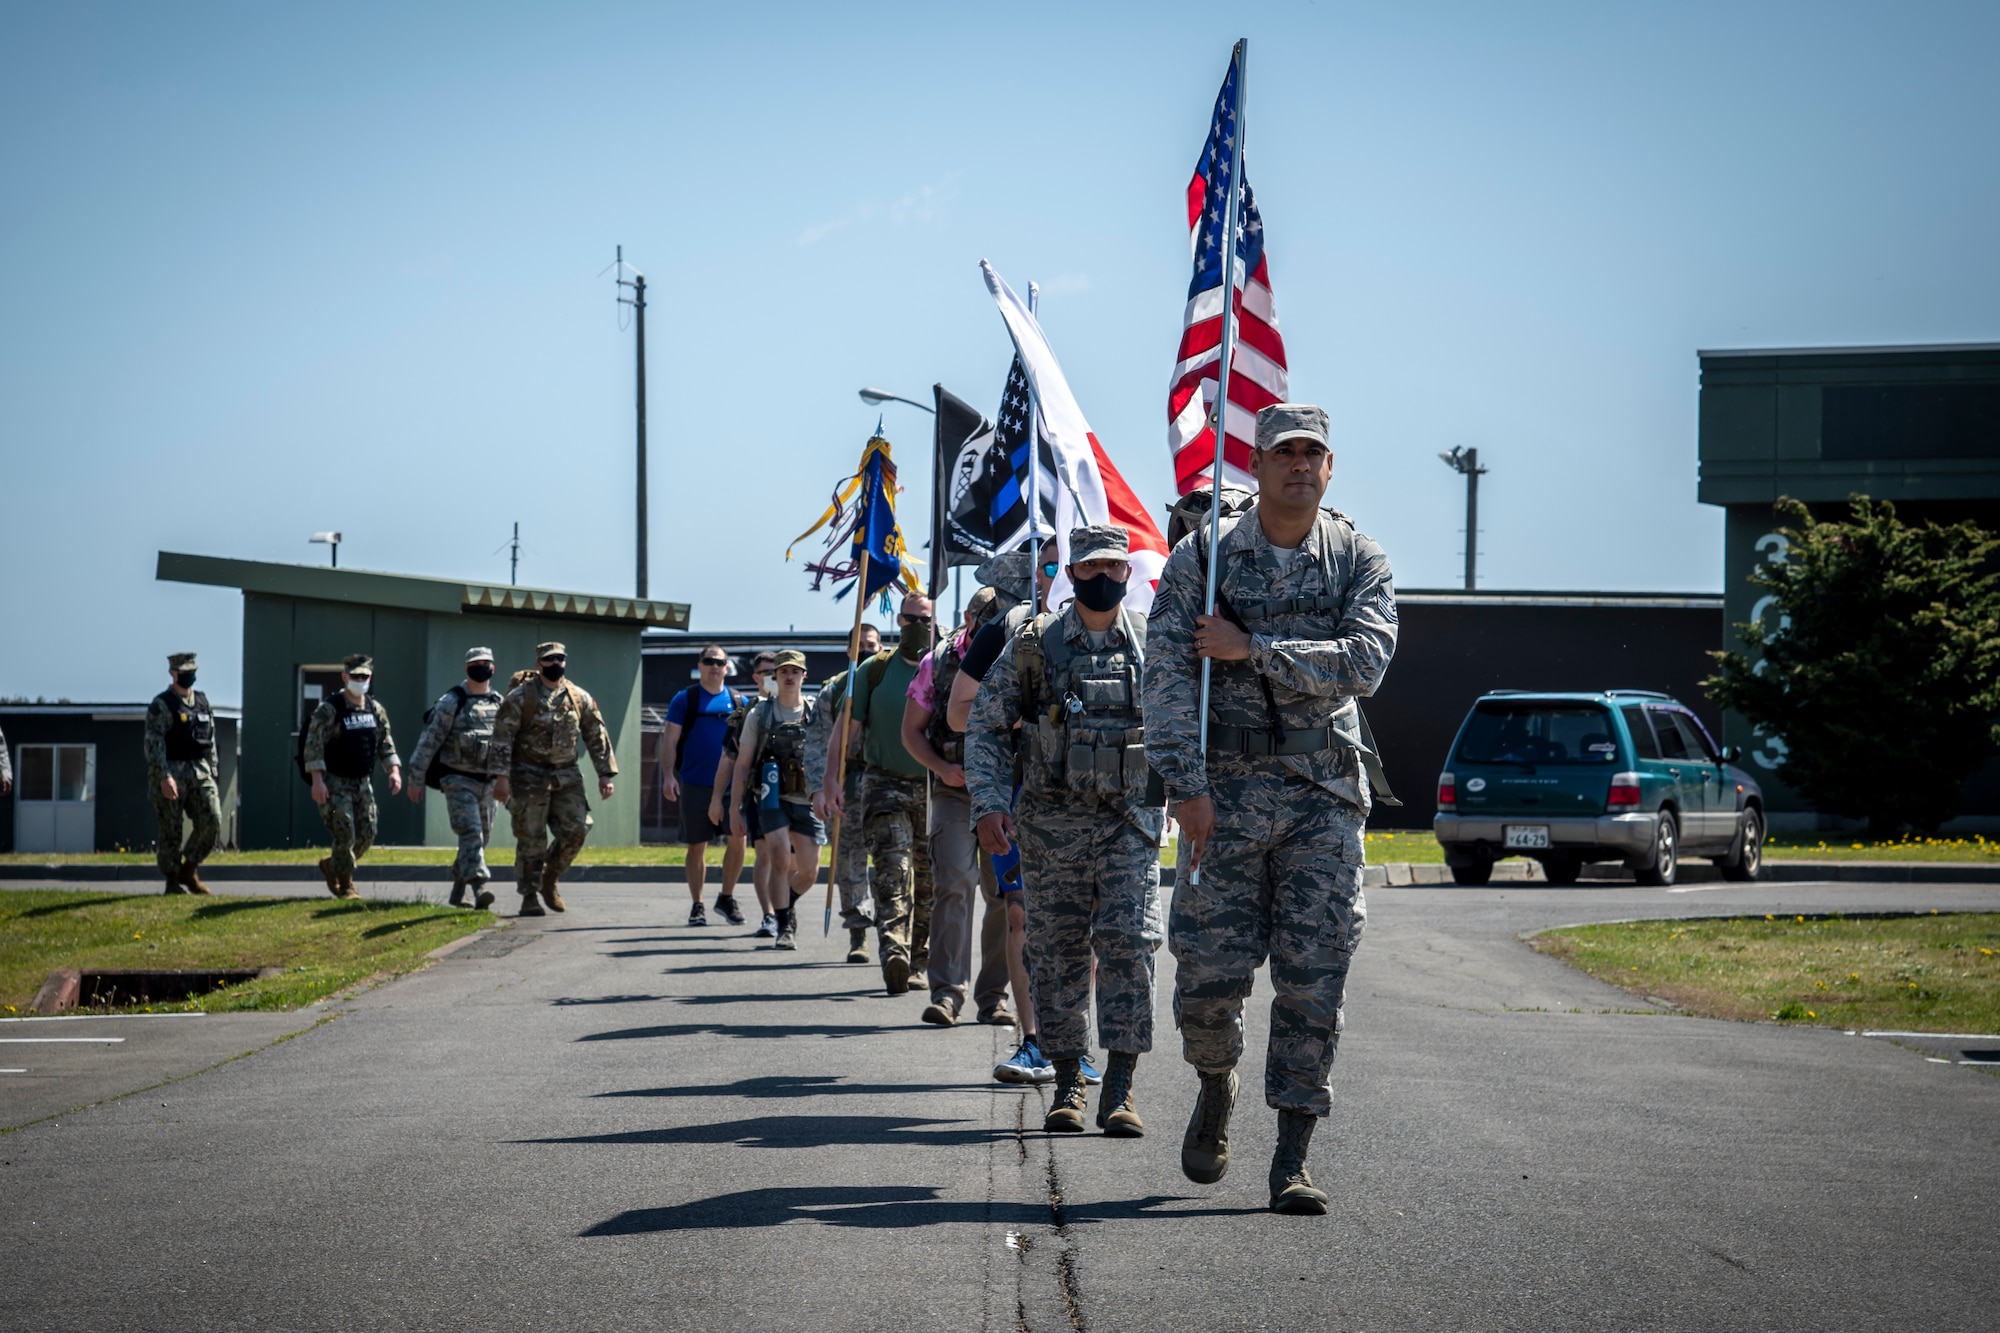 Misawa Air Base defenders participate in the 2020 Police Week 5K ruck march at Misawa AB, Japan, May 11, 2020. Security forces are responsible for protecting the U.S. Air Force’s most valuable assets–the lives of their fellow Airmen, aircraft and installations around the world. Police Week pays special recognition to those who lost their lives in the line of duty for the safety and protection of others. (U.S. Air Force photo by Airman 1st Class China M. Shock)